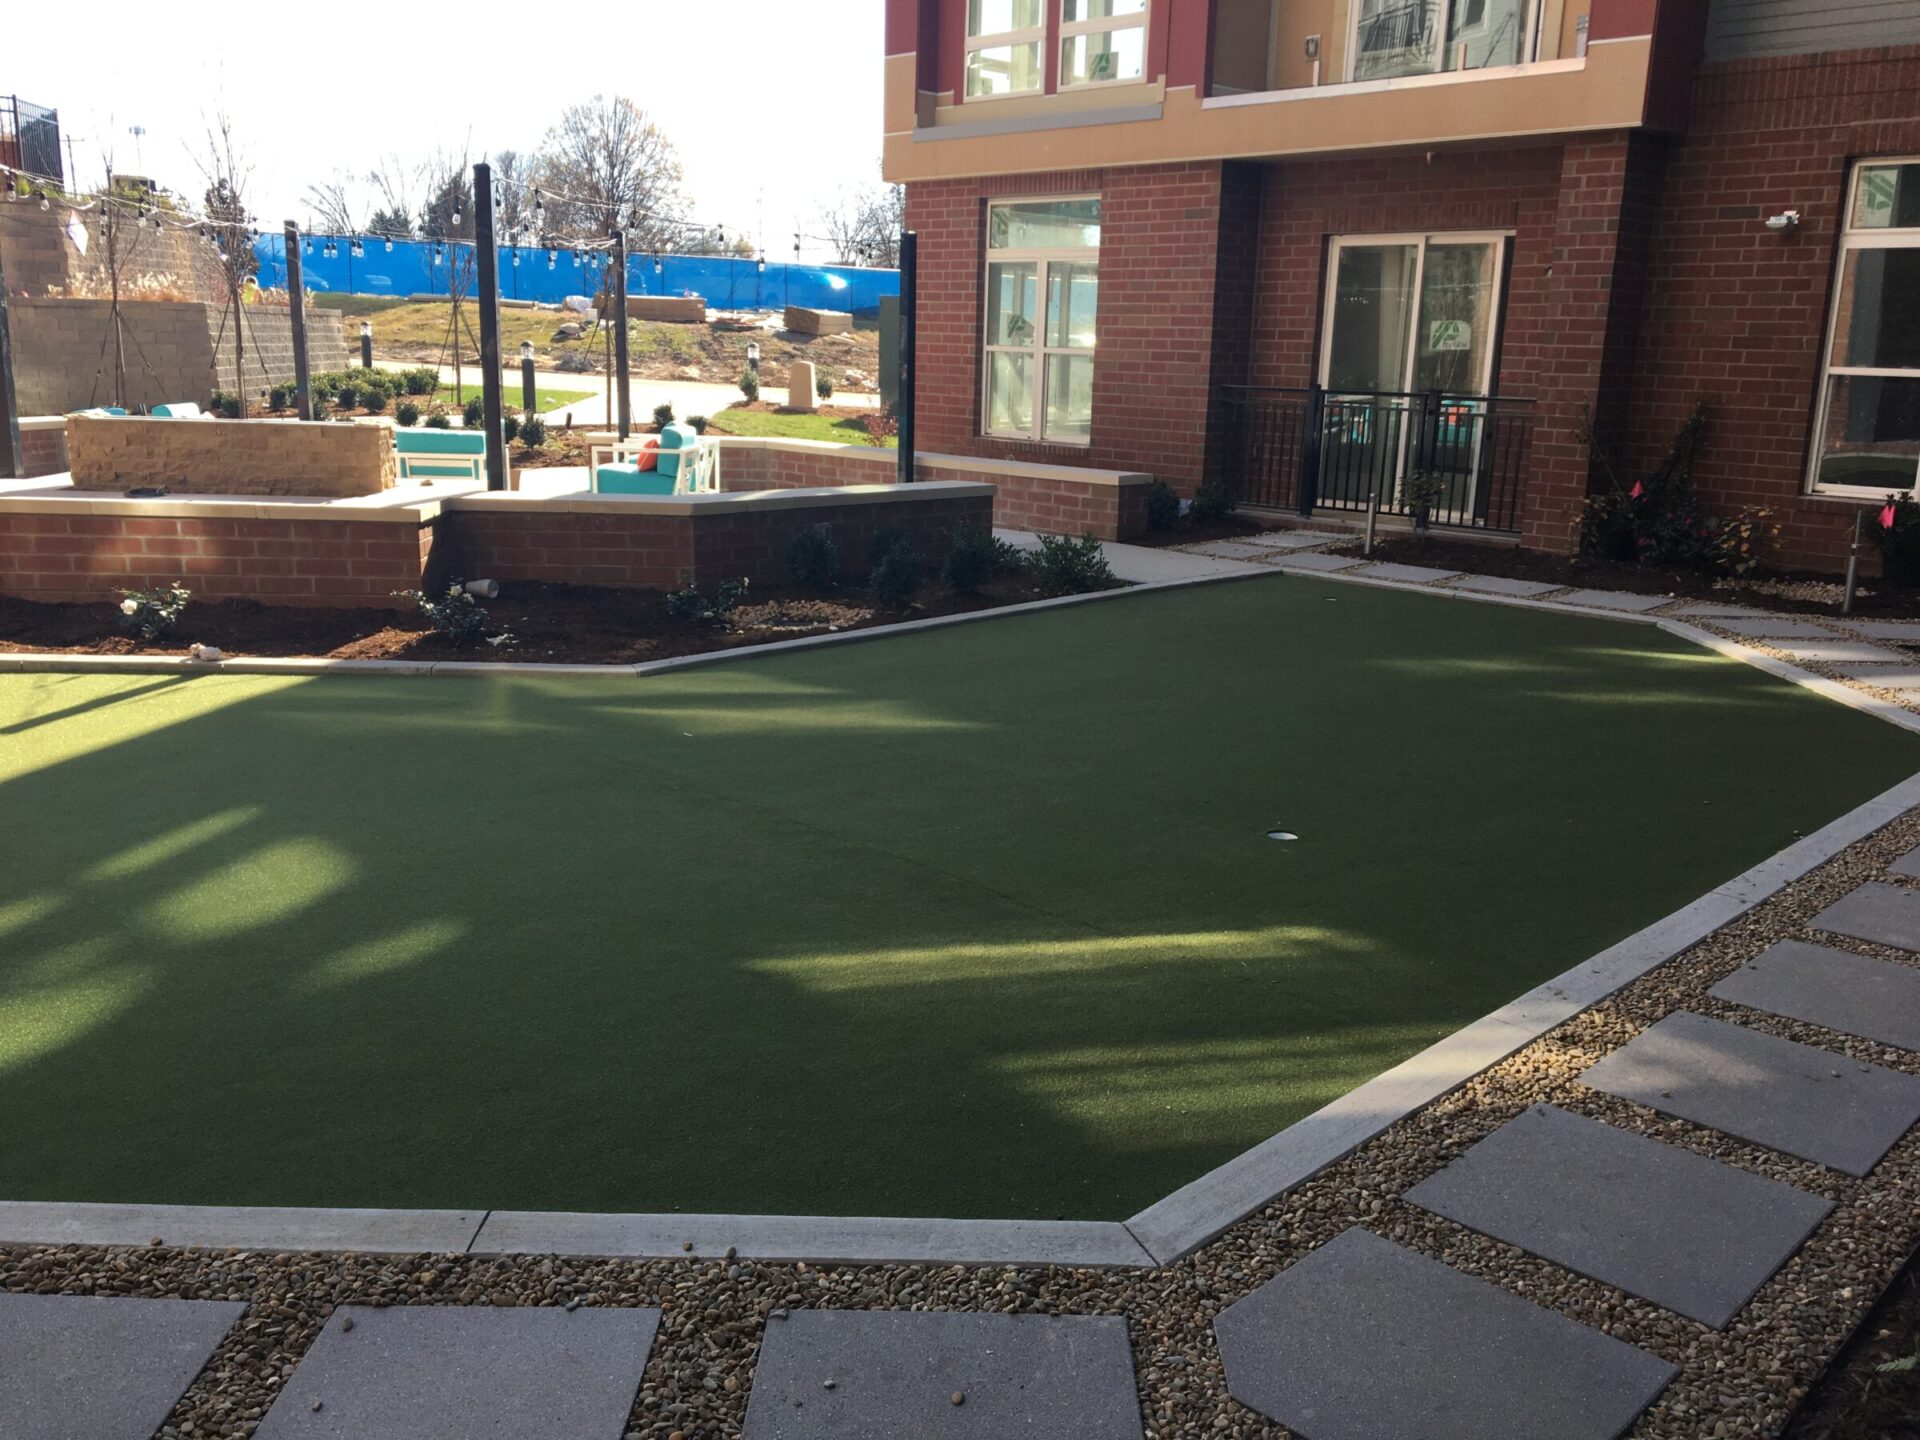 This image shows a small outdoor putting green bordered by brick, with a path of stepping stones leading up to it, near a red brick building.